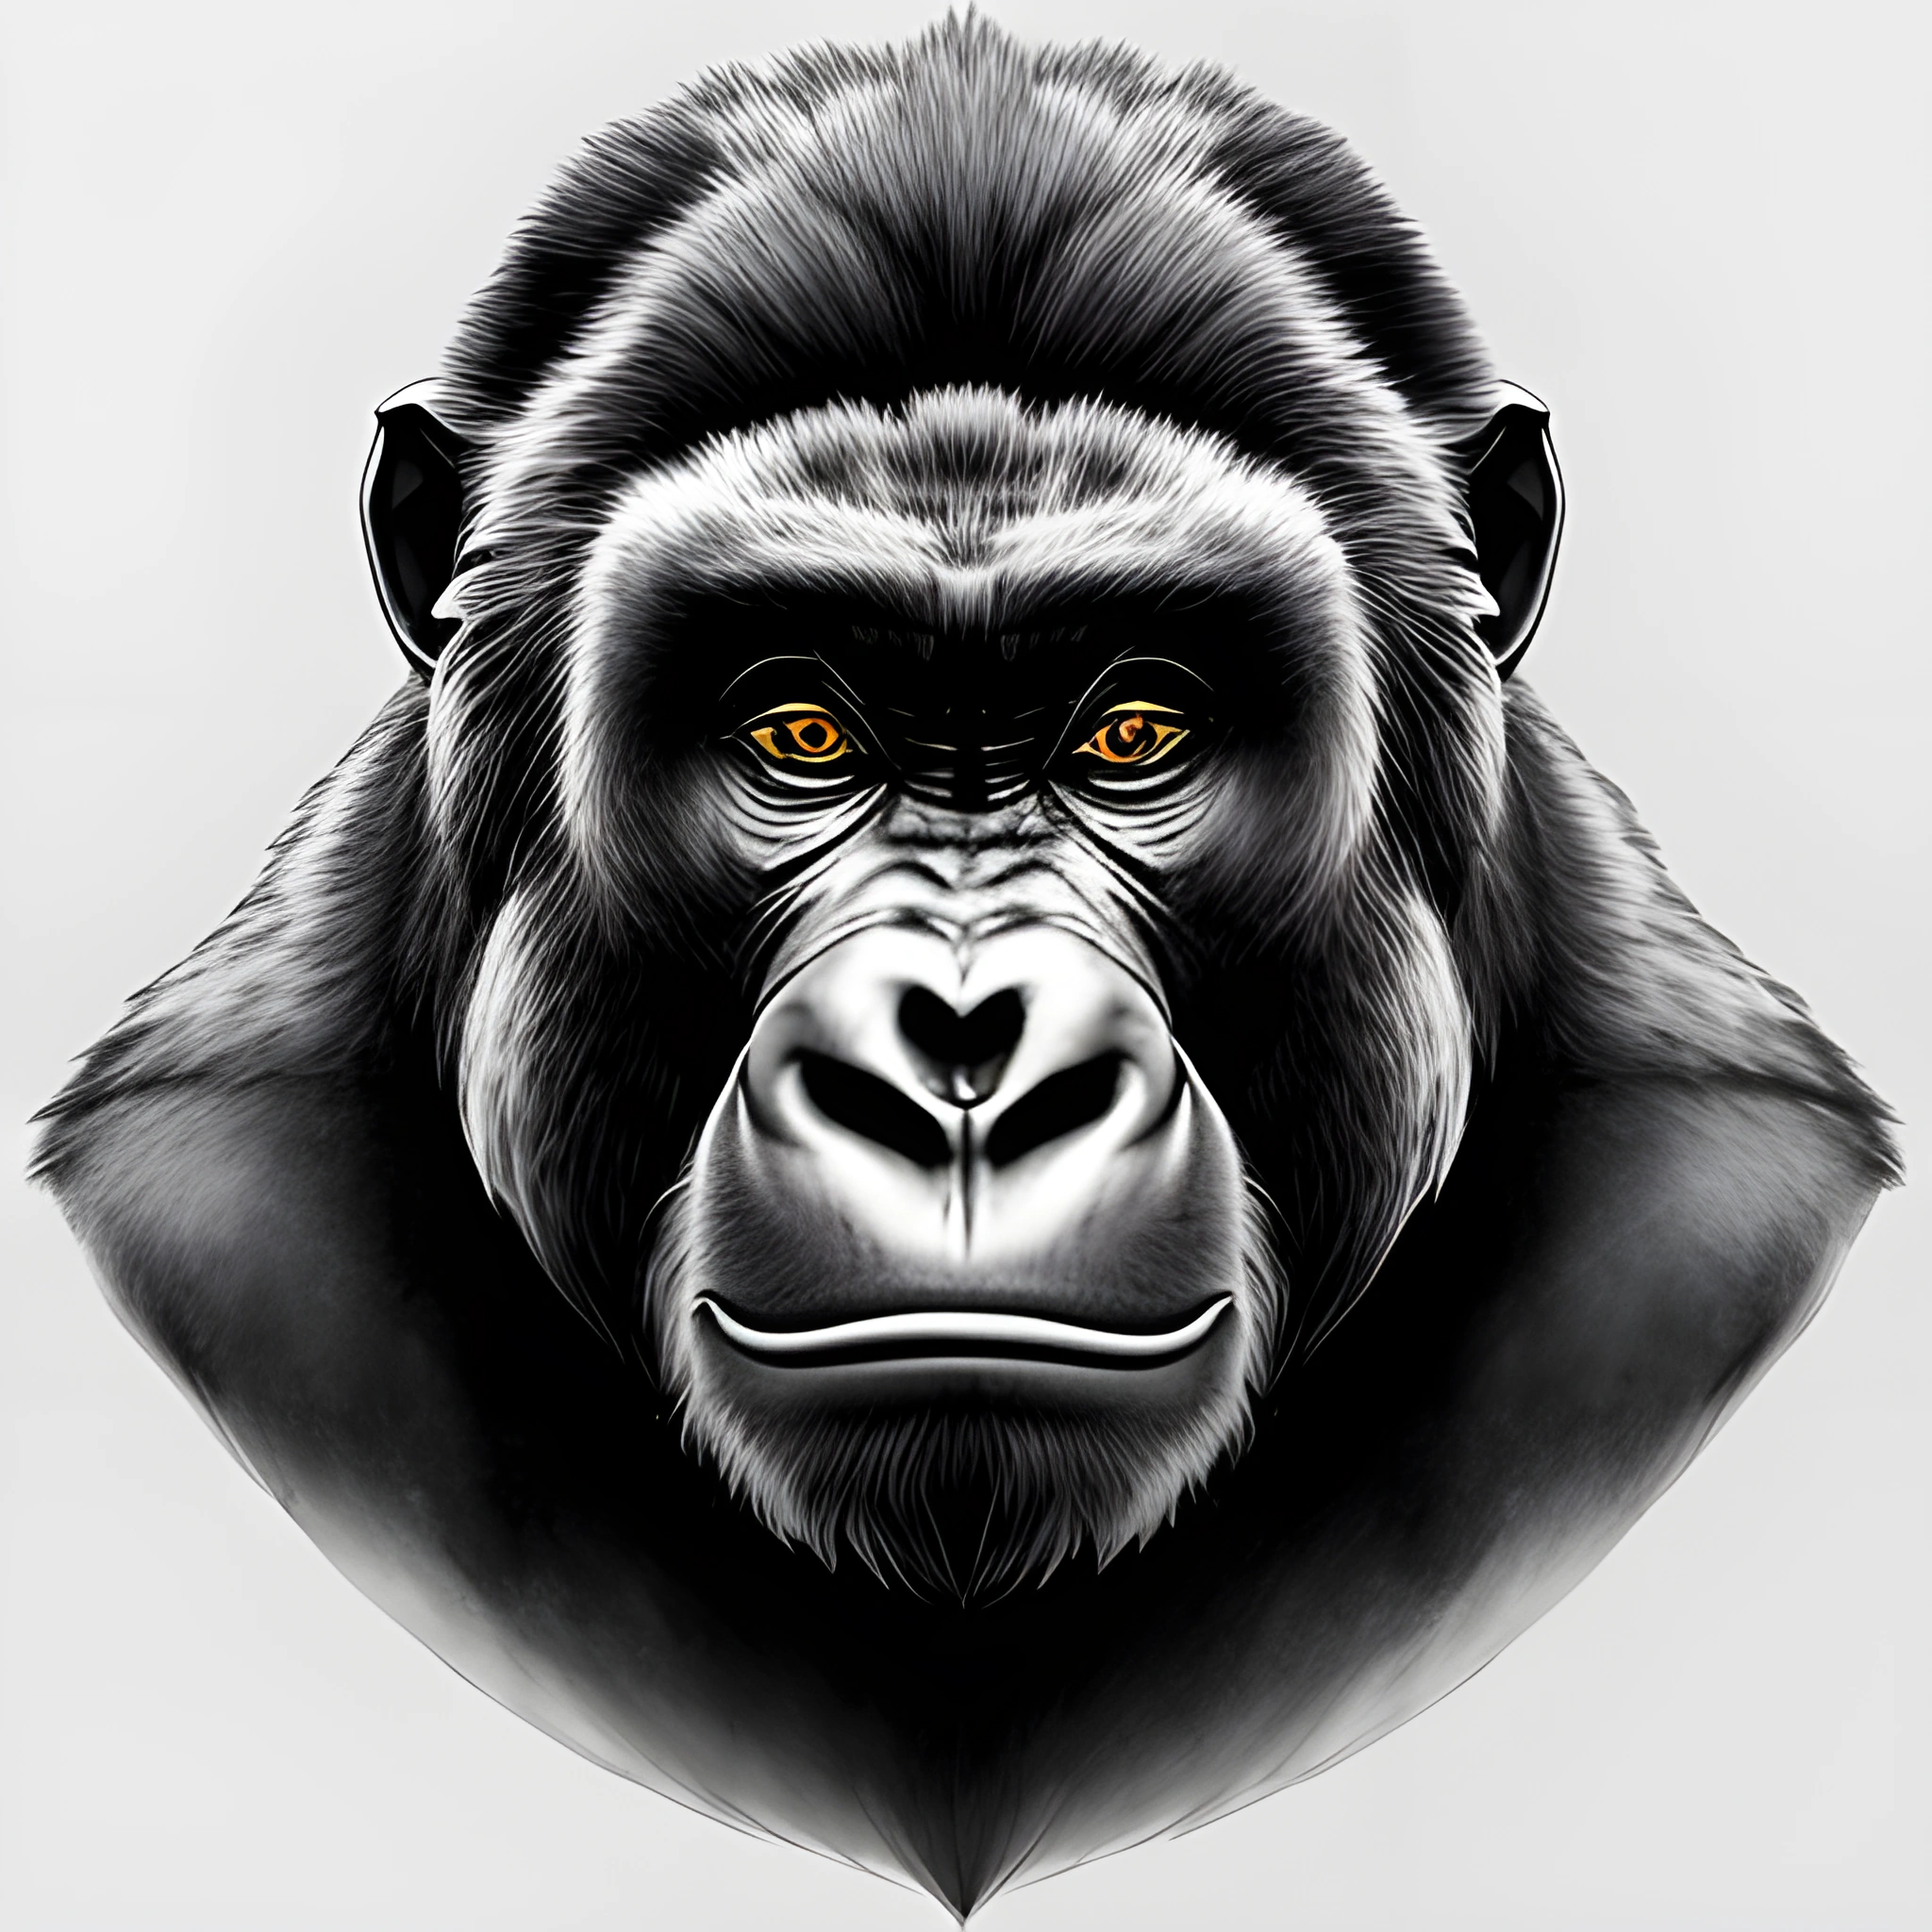 portrait of a gorilla with a serious look on his face